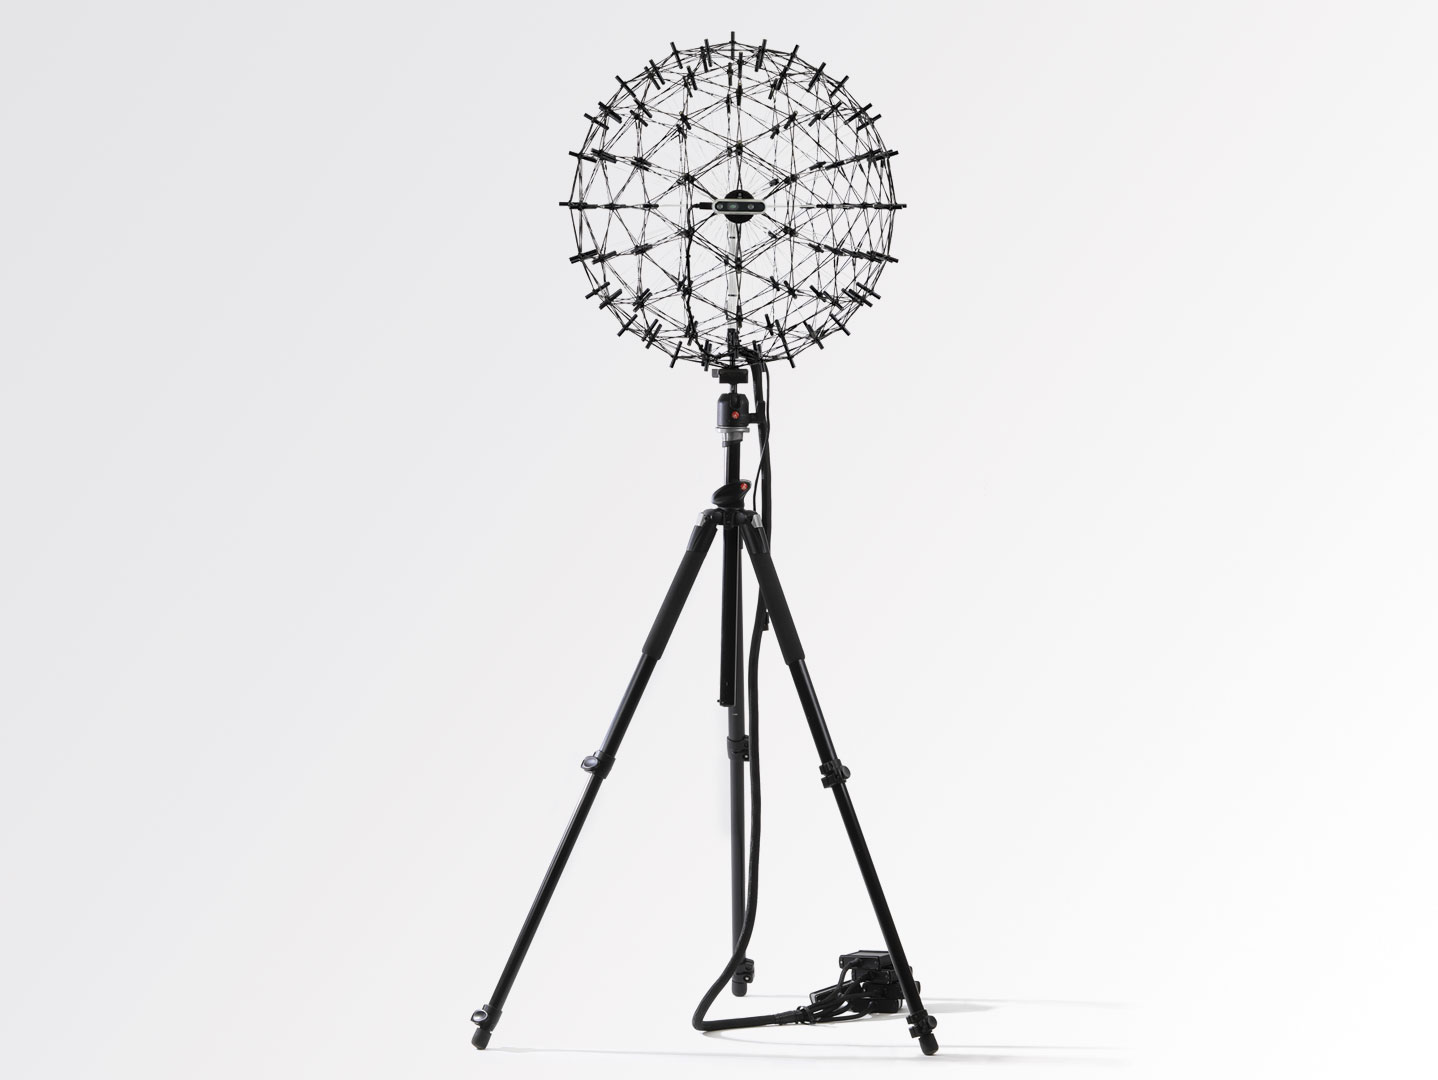 Sphere120 AC Pro microphone array on a tripod